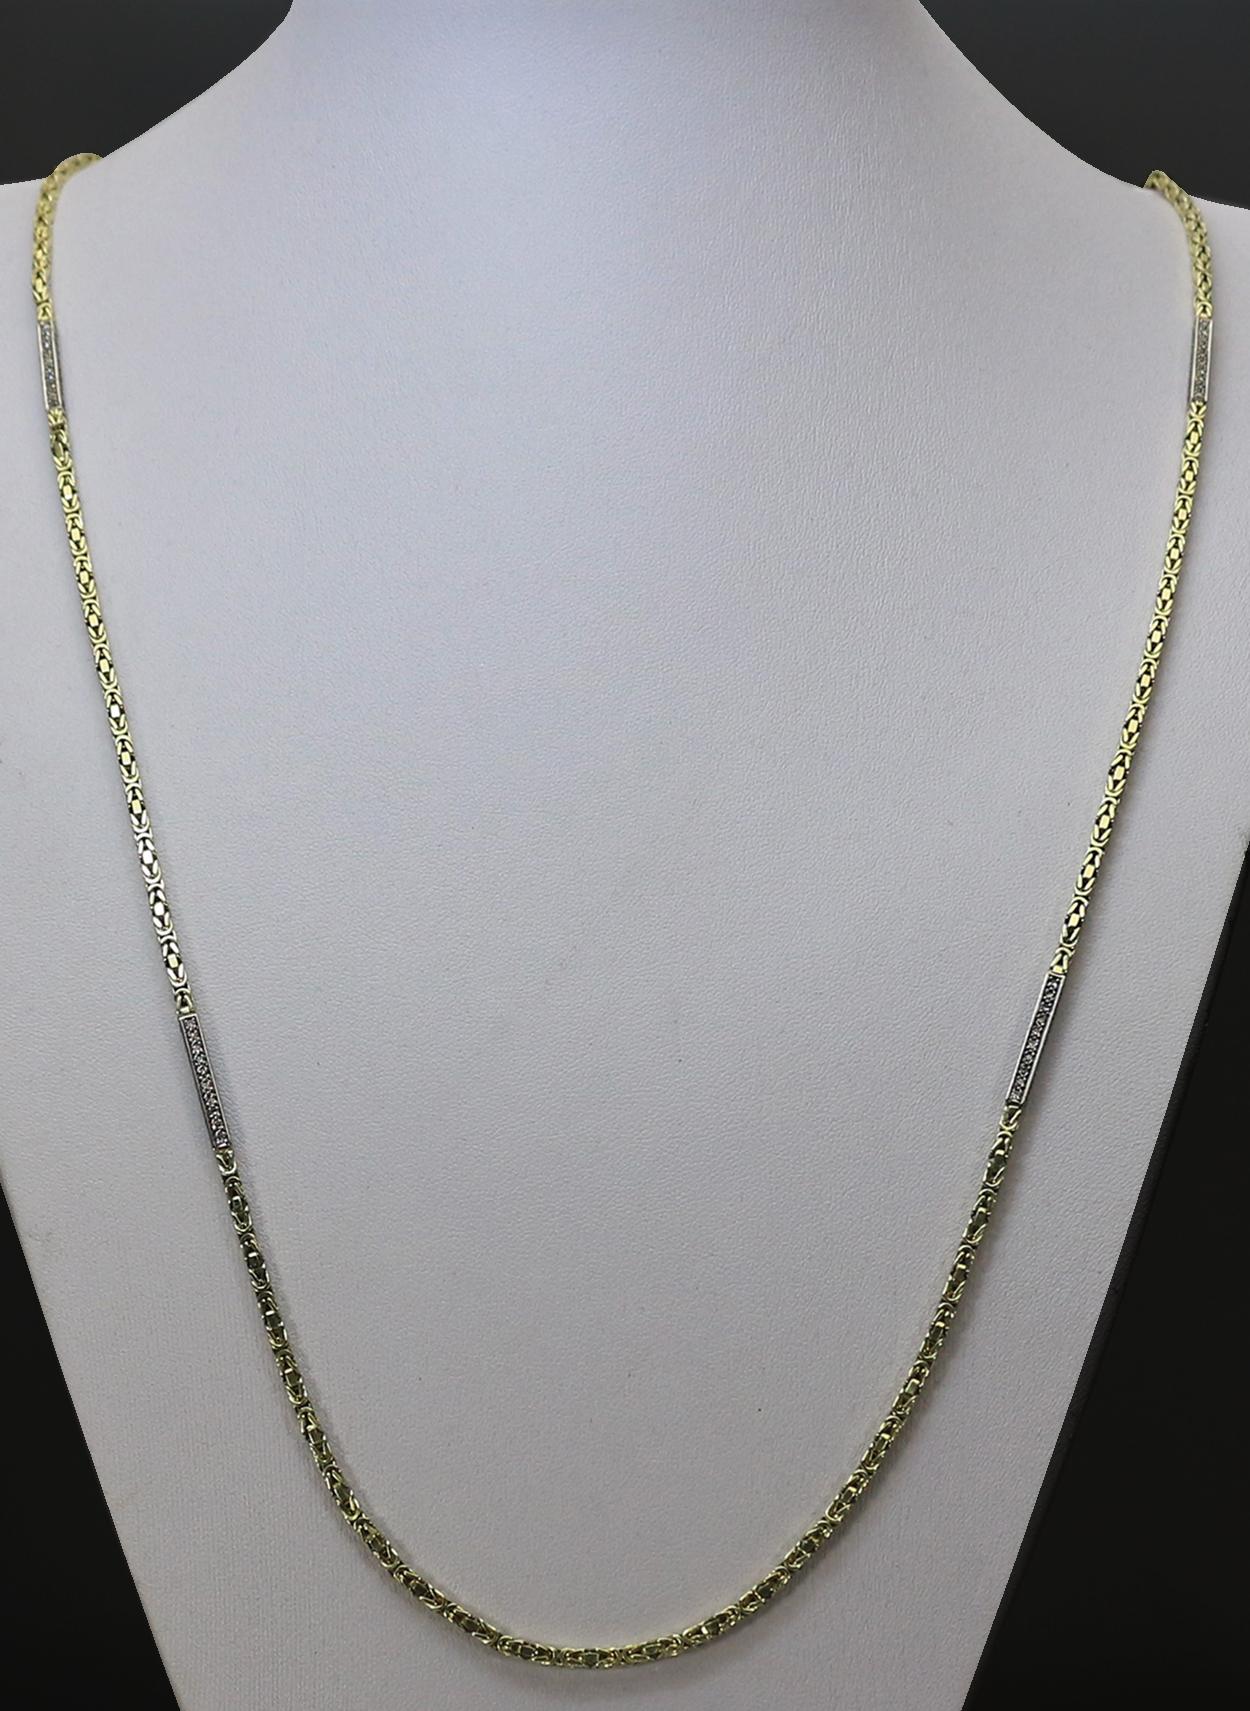 Brilliant Cut Handcrafted 14K Gold King's Chain with 2.4ct Diamonds For Sale